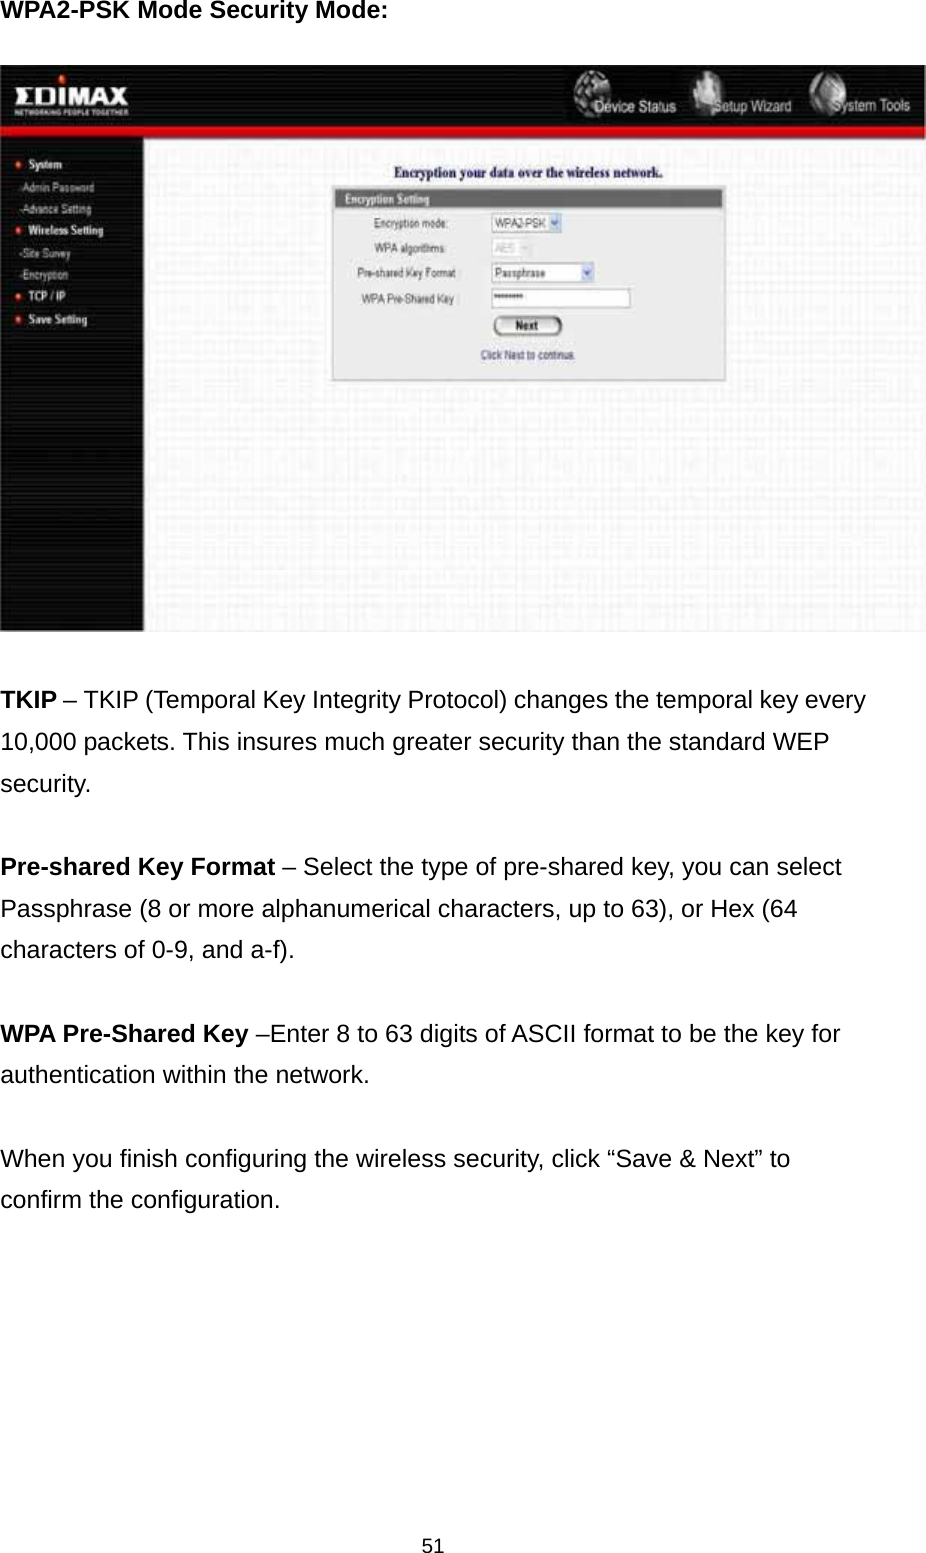 51 WPA2-PSK Mode Security Mode:    TKIP – TKIP (Temporal Key Integrity Protocol) changes the temporal key every 10,000 packets. This insures much greater security than the standard WEP security.  Pre-shared Key Format – Select the type of pre-shared key, you can select Passphrase (8 or more alphanumerical characters, up to 63), or Hex (64 characters of 0-9, and a-f).  WPA Pre-Shared Key –Enter 8 to 63 digits of ASCII format to be the key for authentication within the network.   When you finish configuring the wireless security, click “Save &amp; Next” to confirm the configuration.        